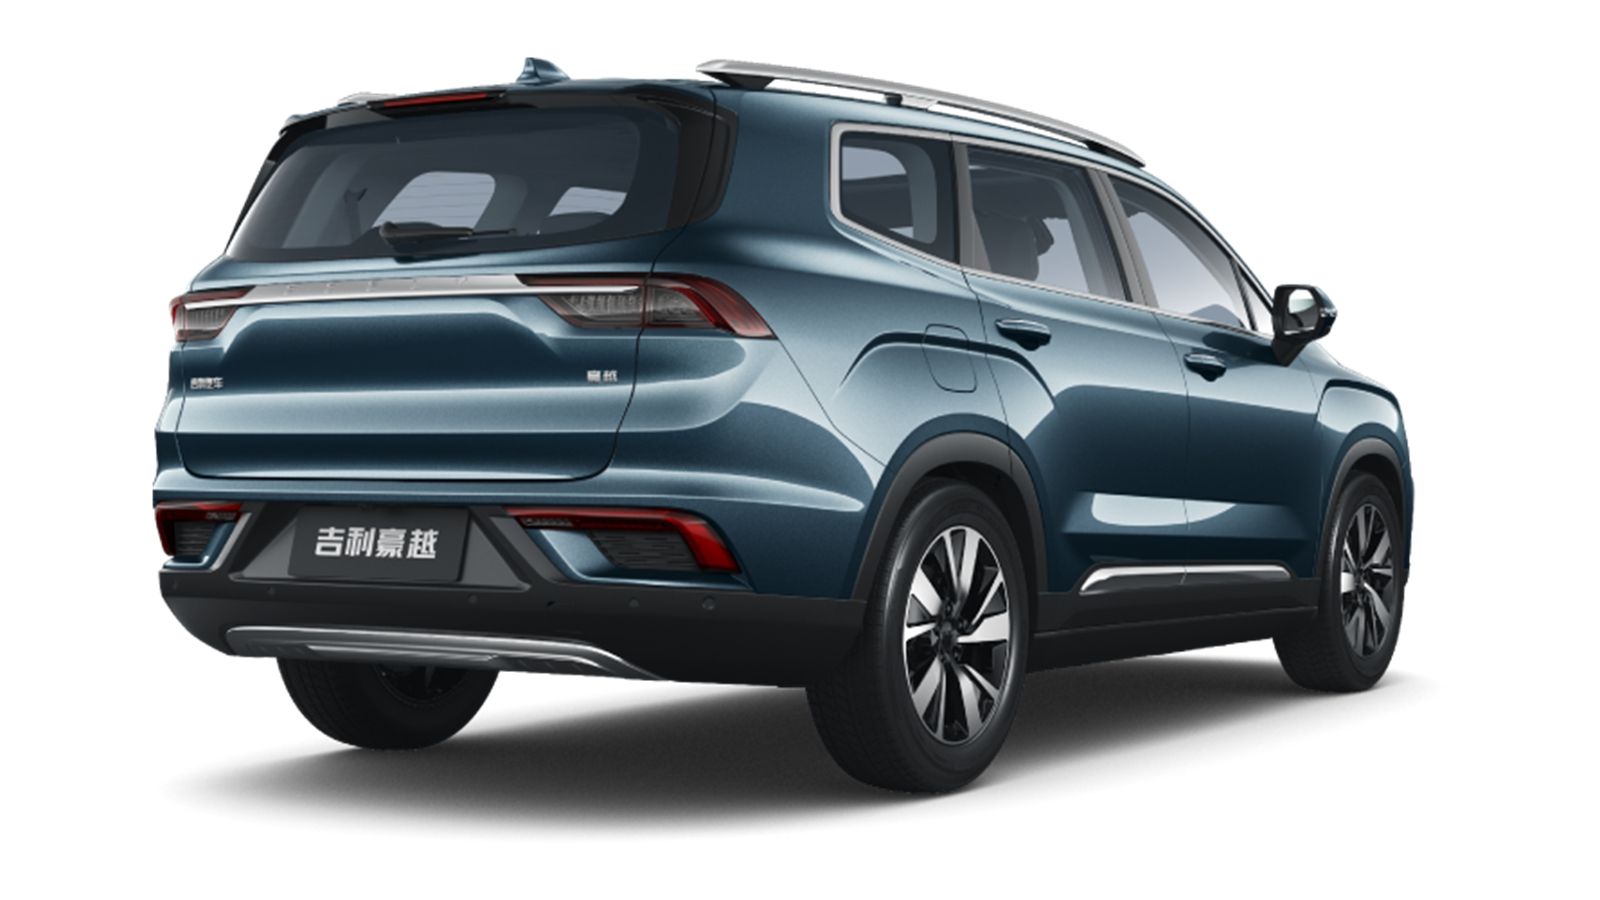 2020 Geely Hao Yue 1.8TD+7DCT Exterior 005